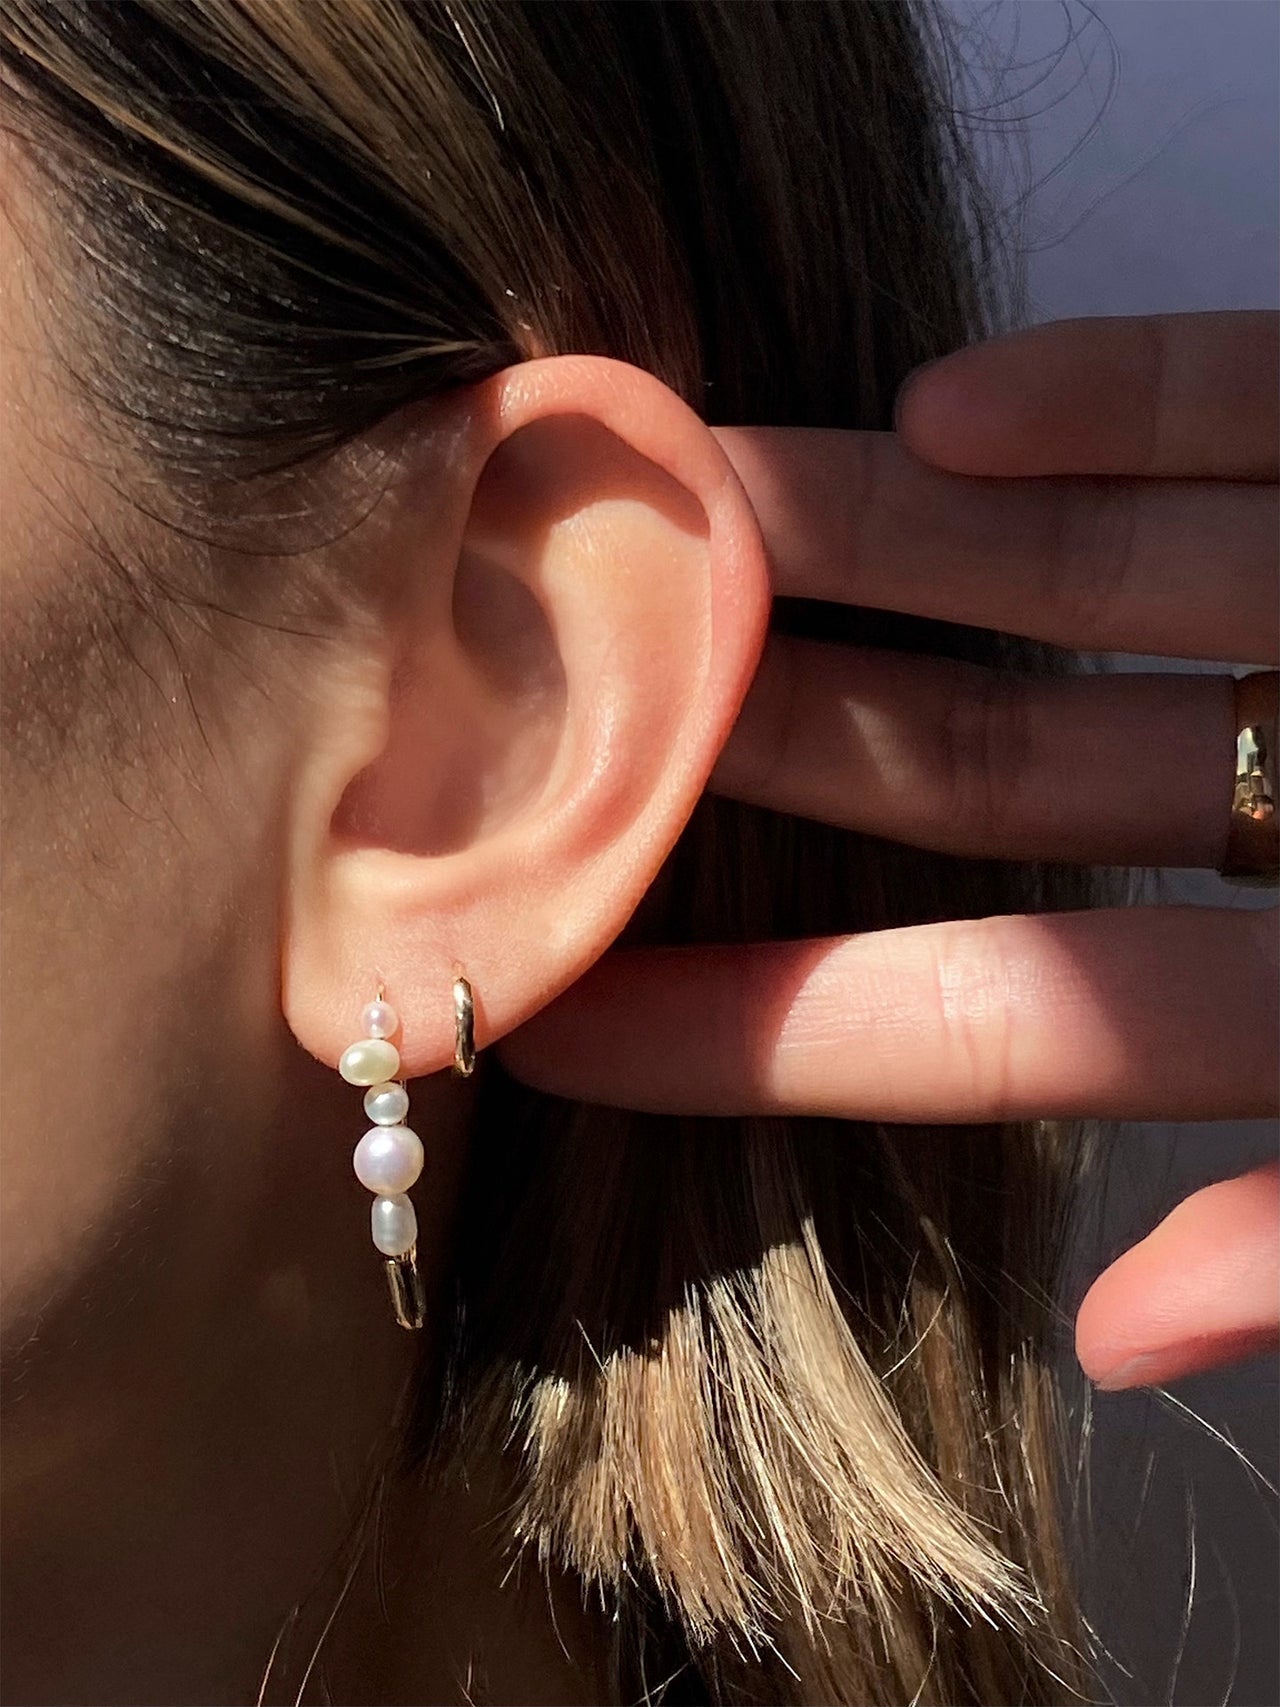 Mixed Pearl Safety Pin Earring in 14k Yellow Gold by Loren Stewart